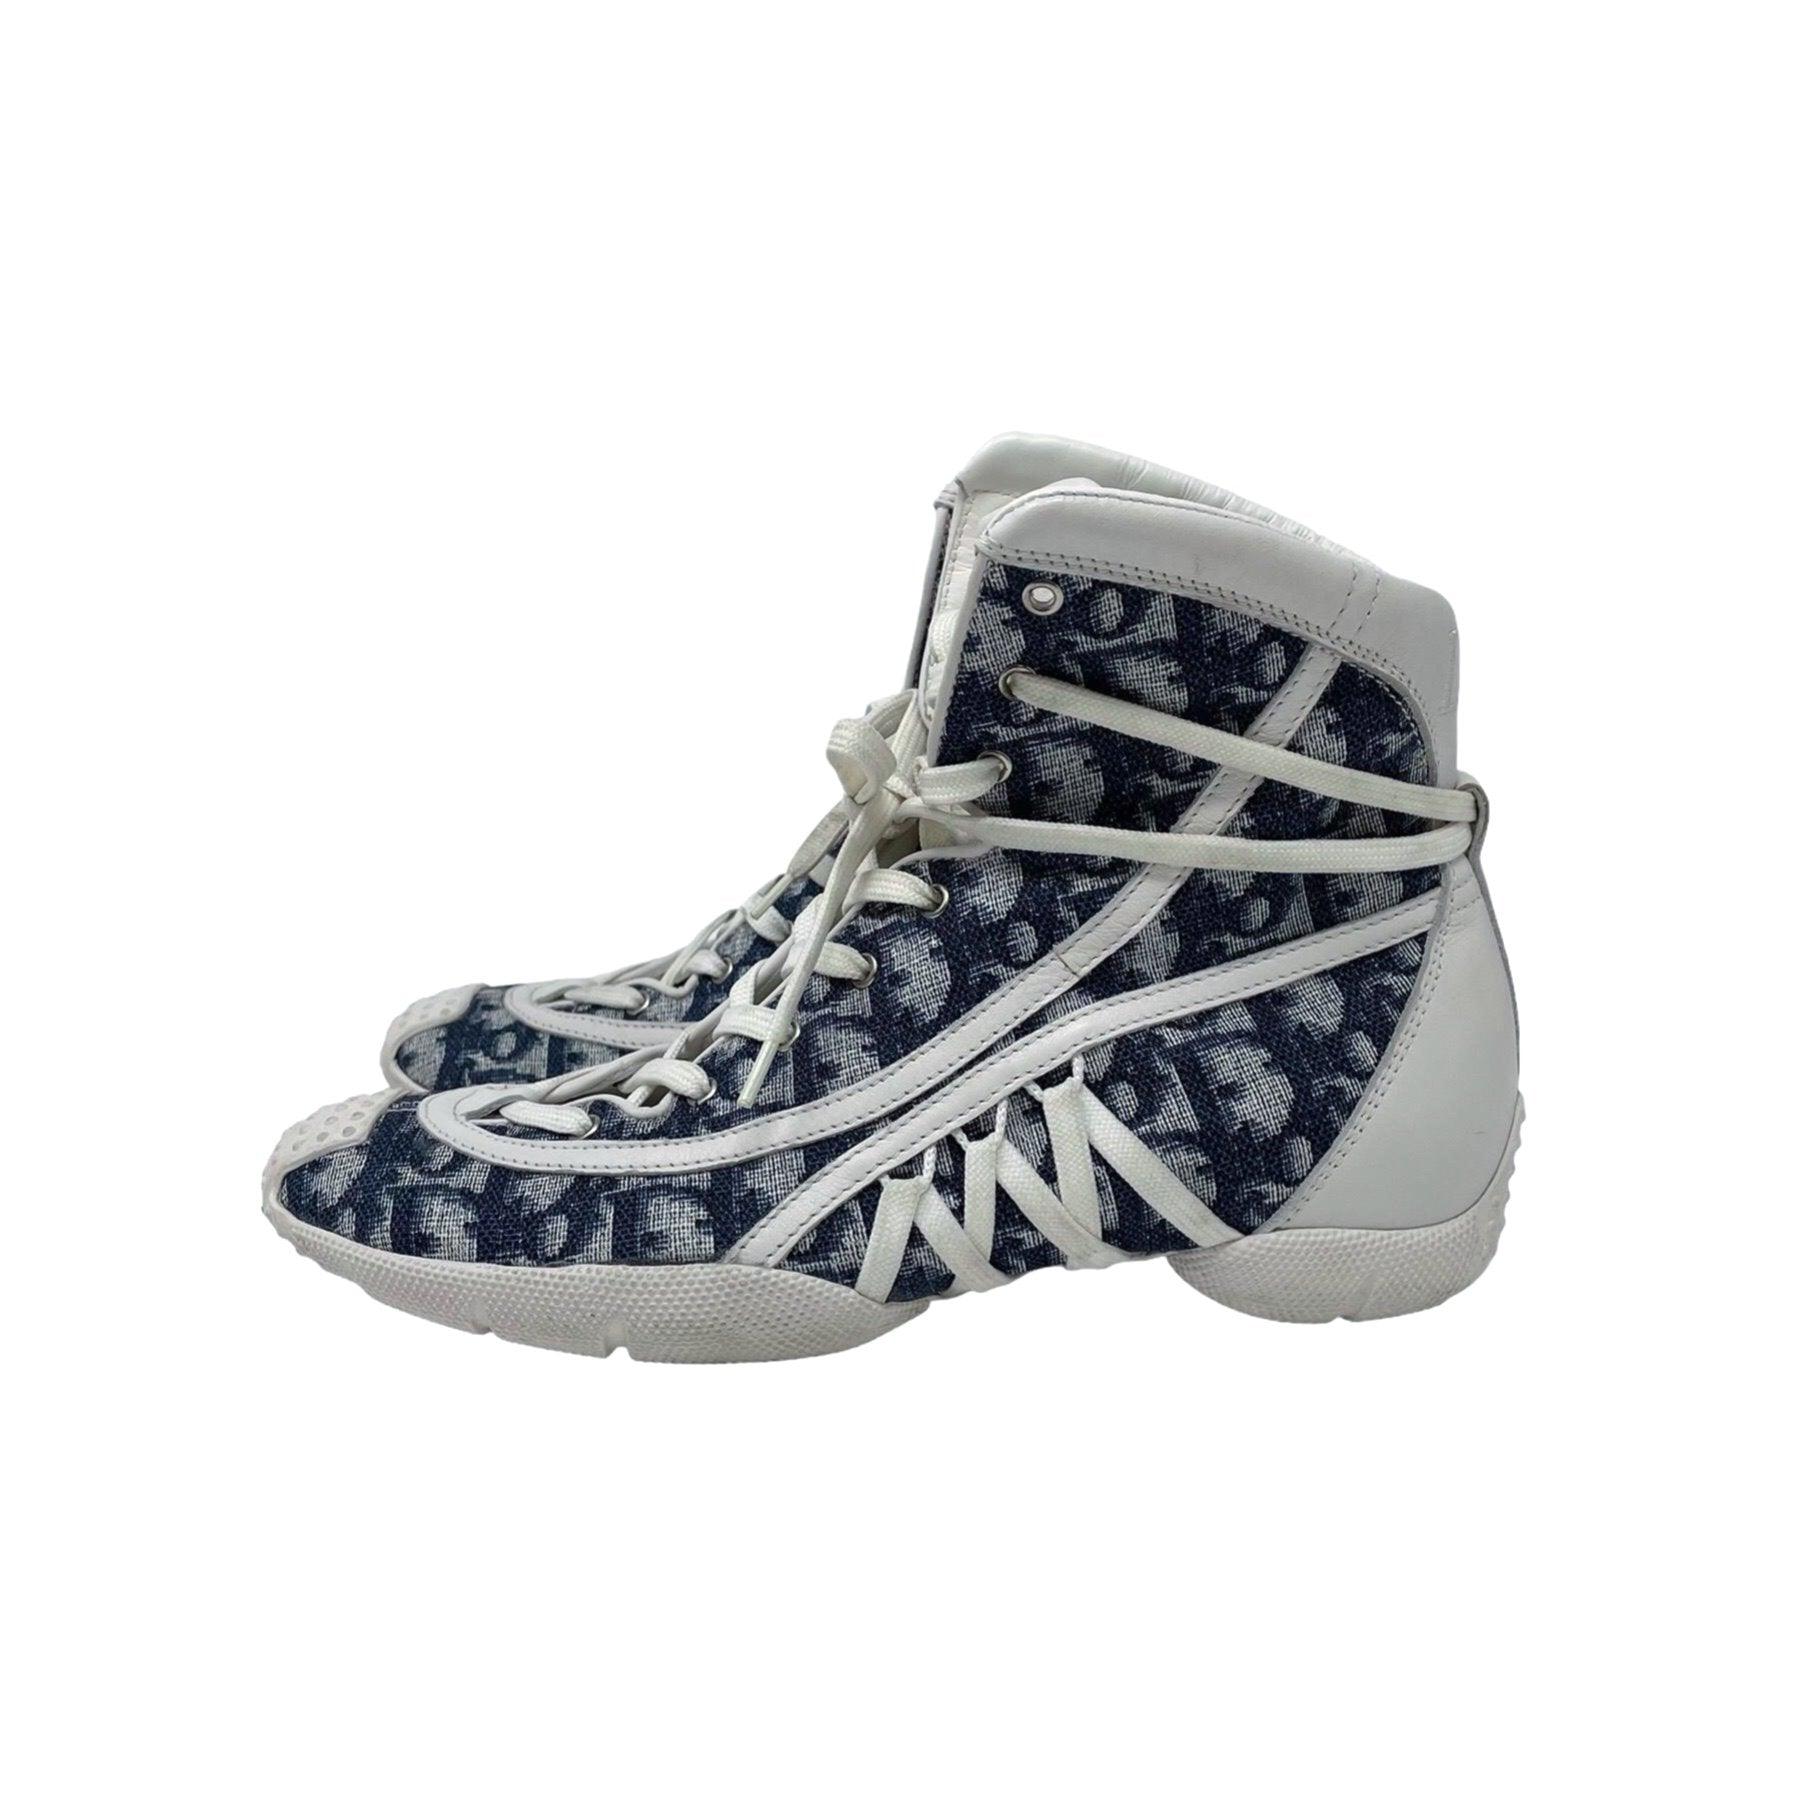 Dior Blue Logo Hightop Sneakers - Shoes